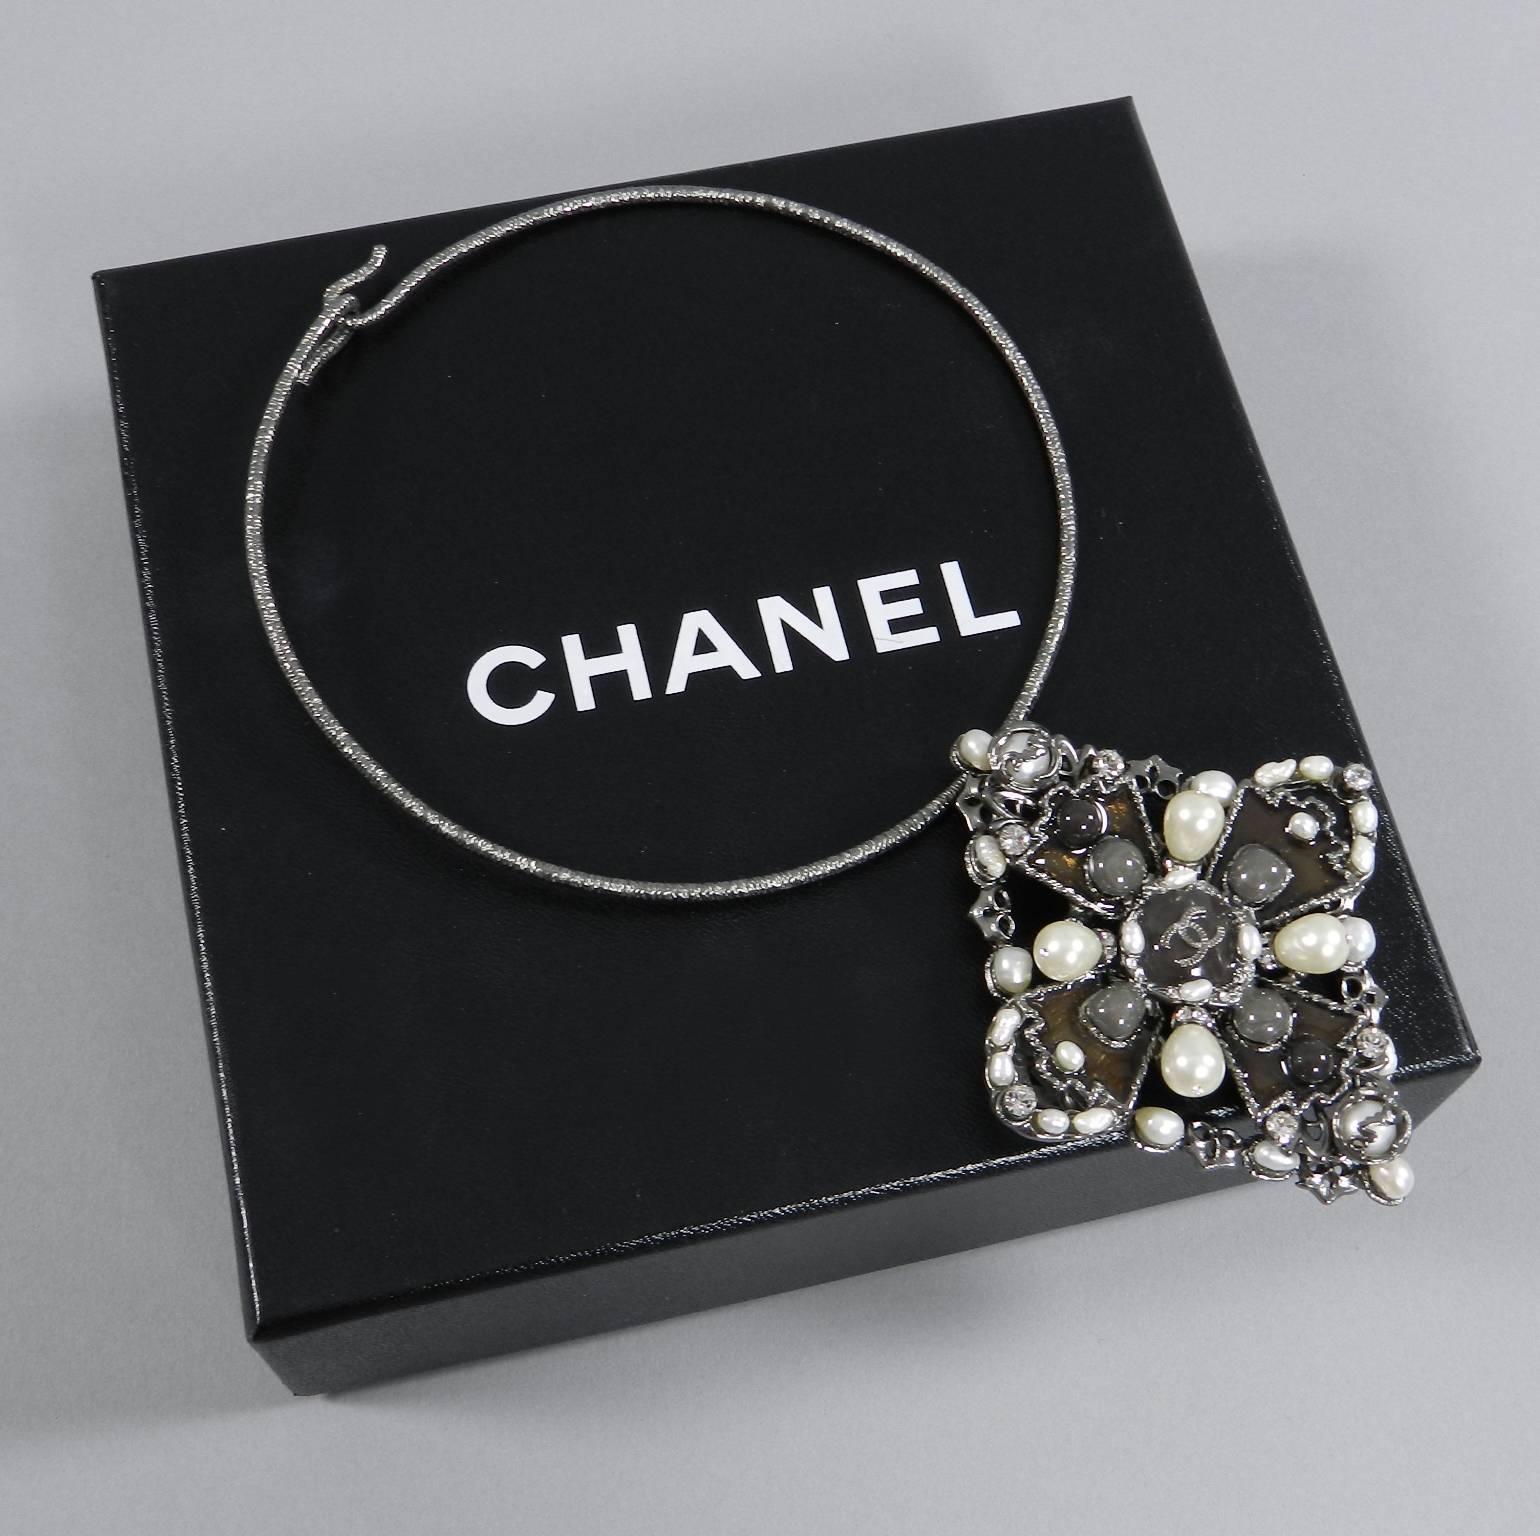 Chanel 10A 2010 pre-fall Shanghai collection runway choker necklace. Faux pearl and real baroque pearl (small pearls are real) cross design pendant with dark brown and grey enamel. Dark silver tone metal (Chanel calls this ruthenium).  Excellent